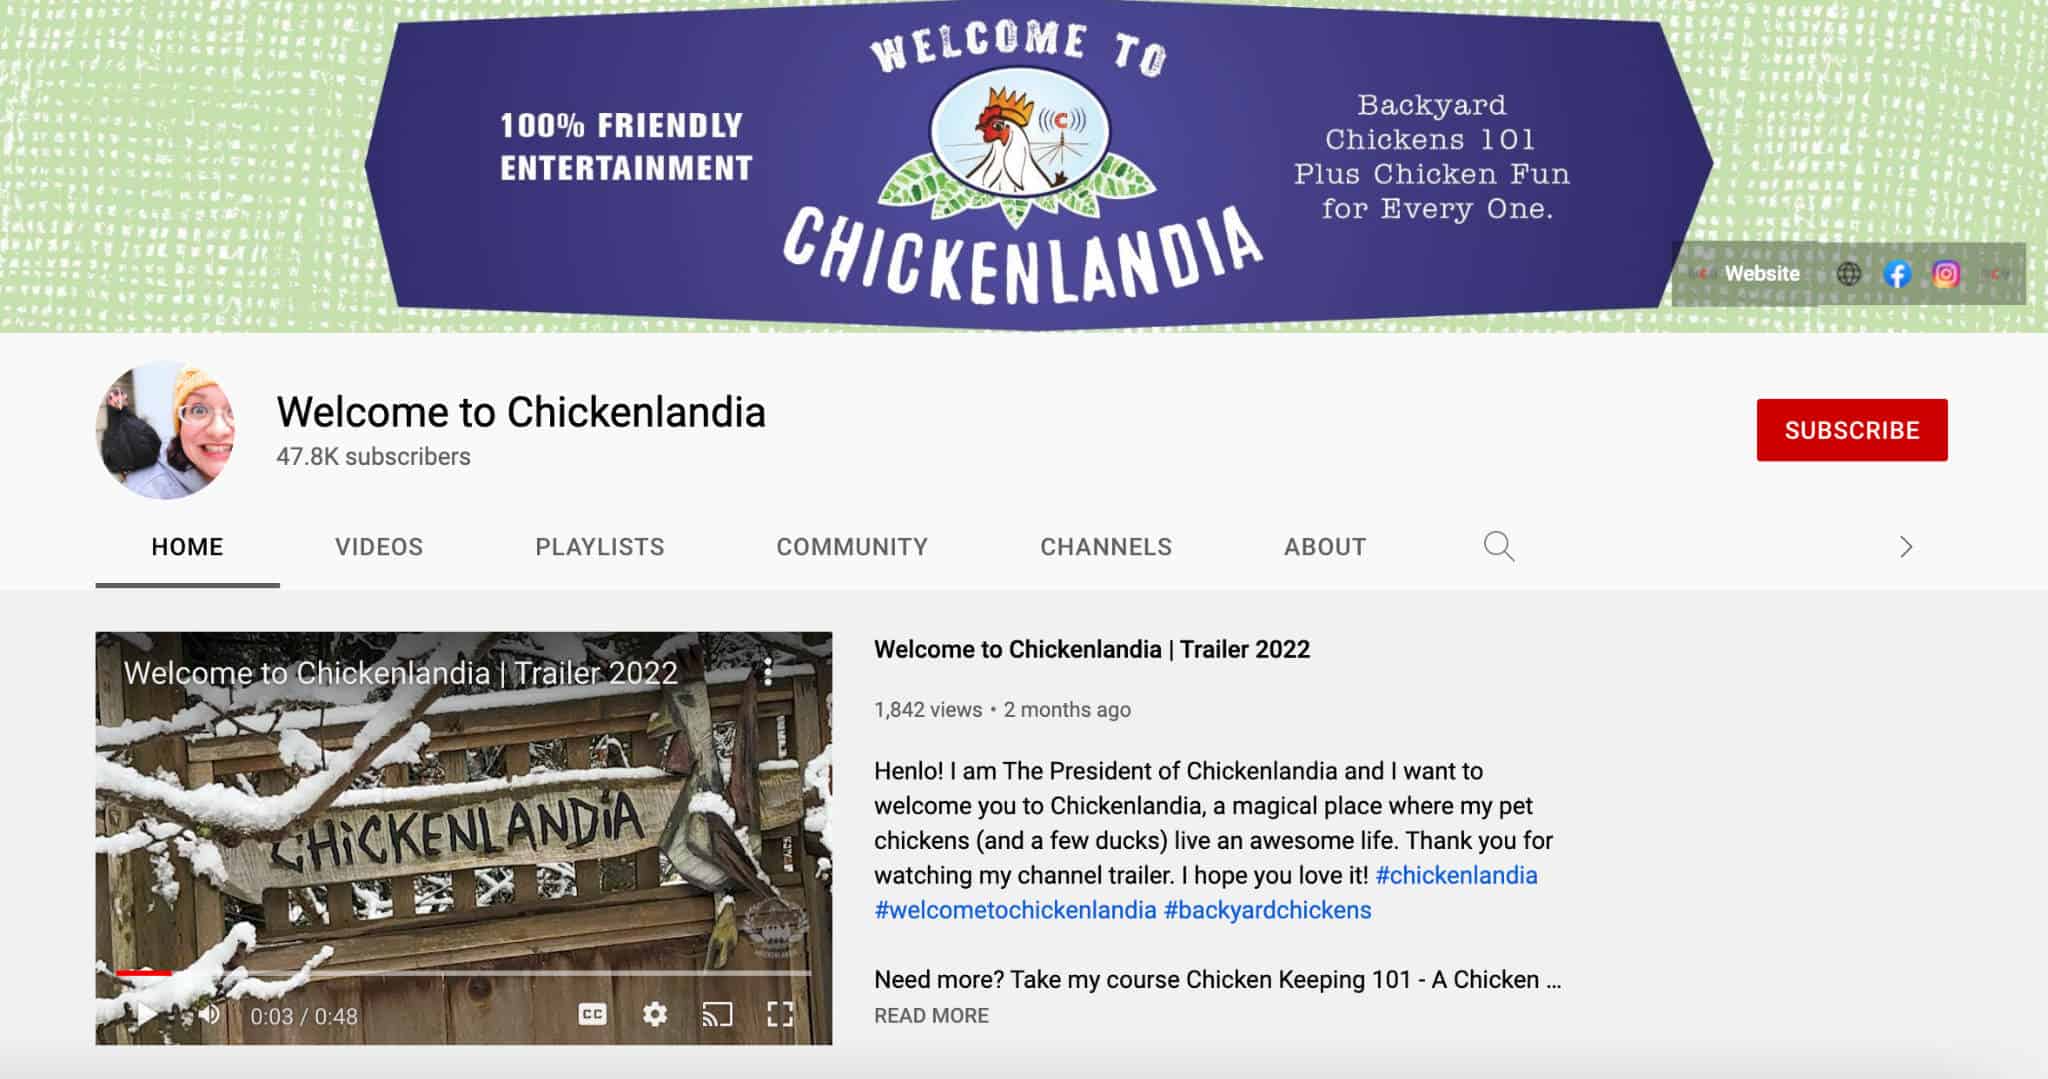 Welcome to Chickenlandia